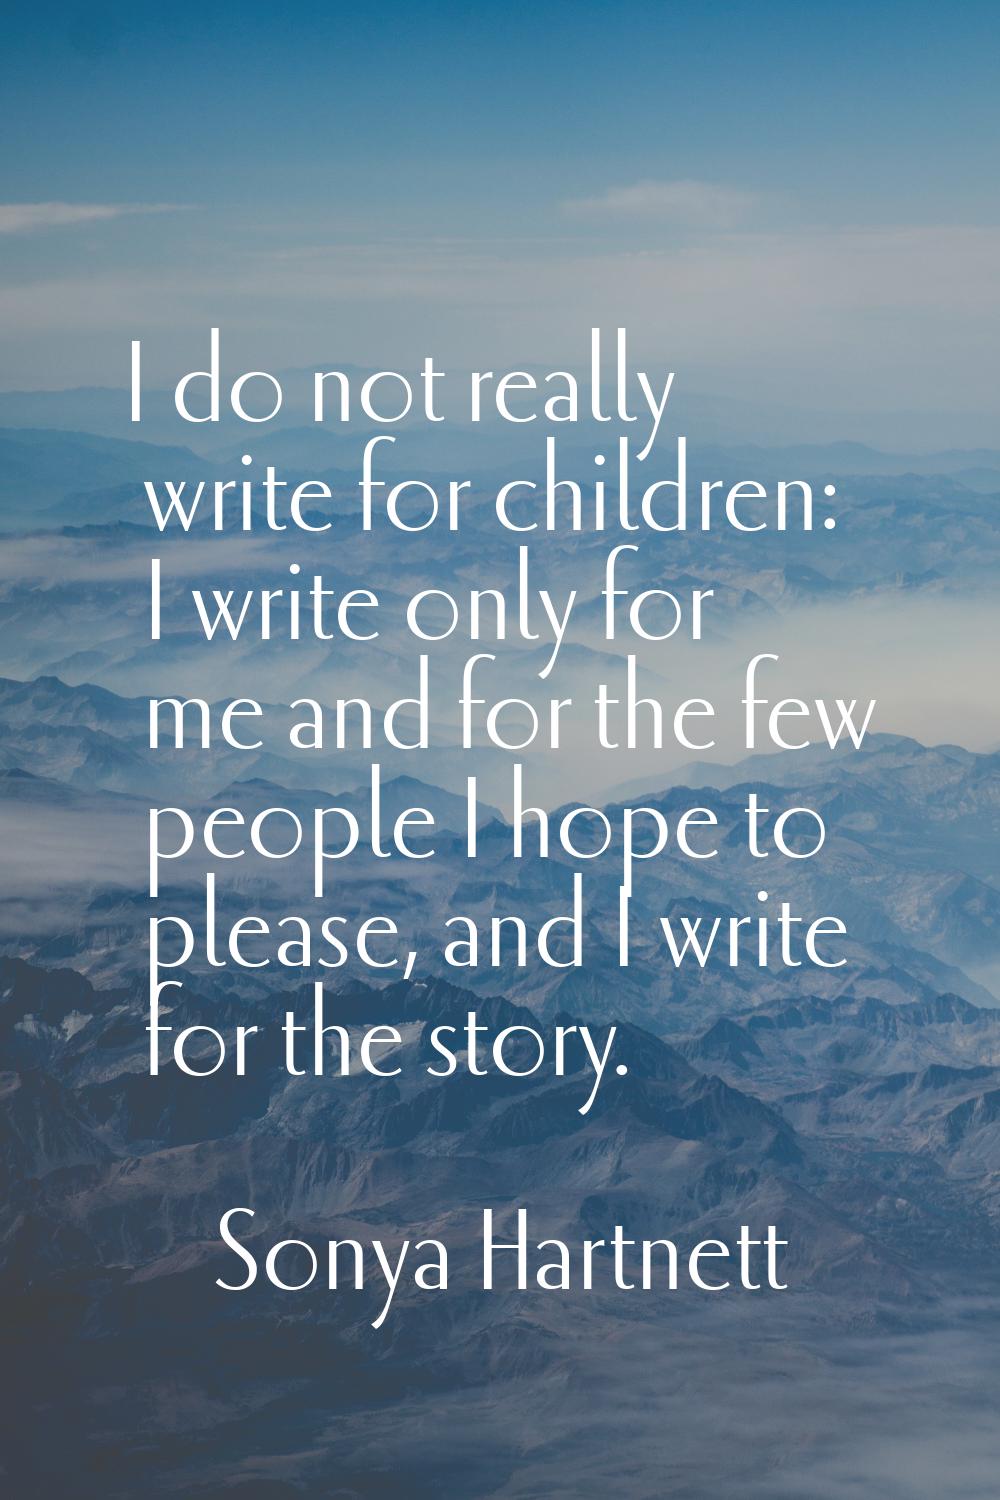 I do not really write for children: I write only for me and for the few people I hope to please, an